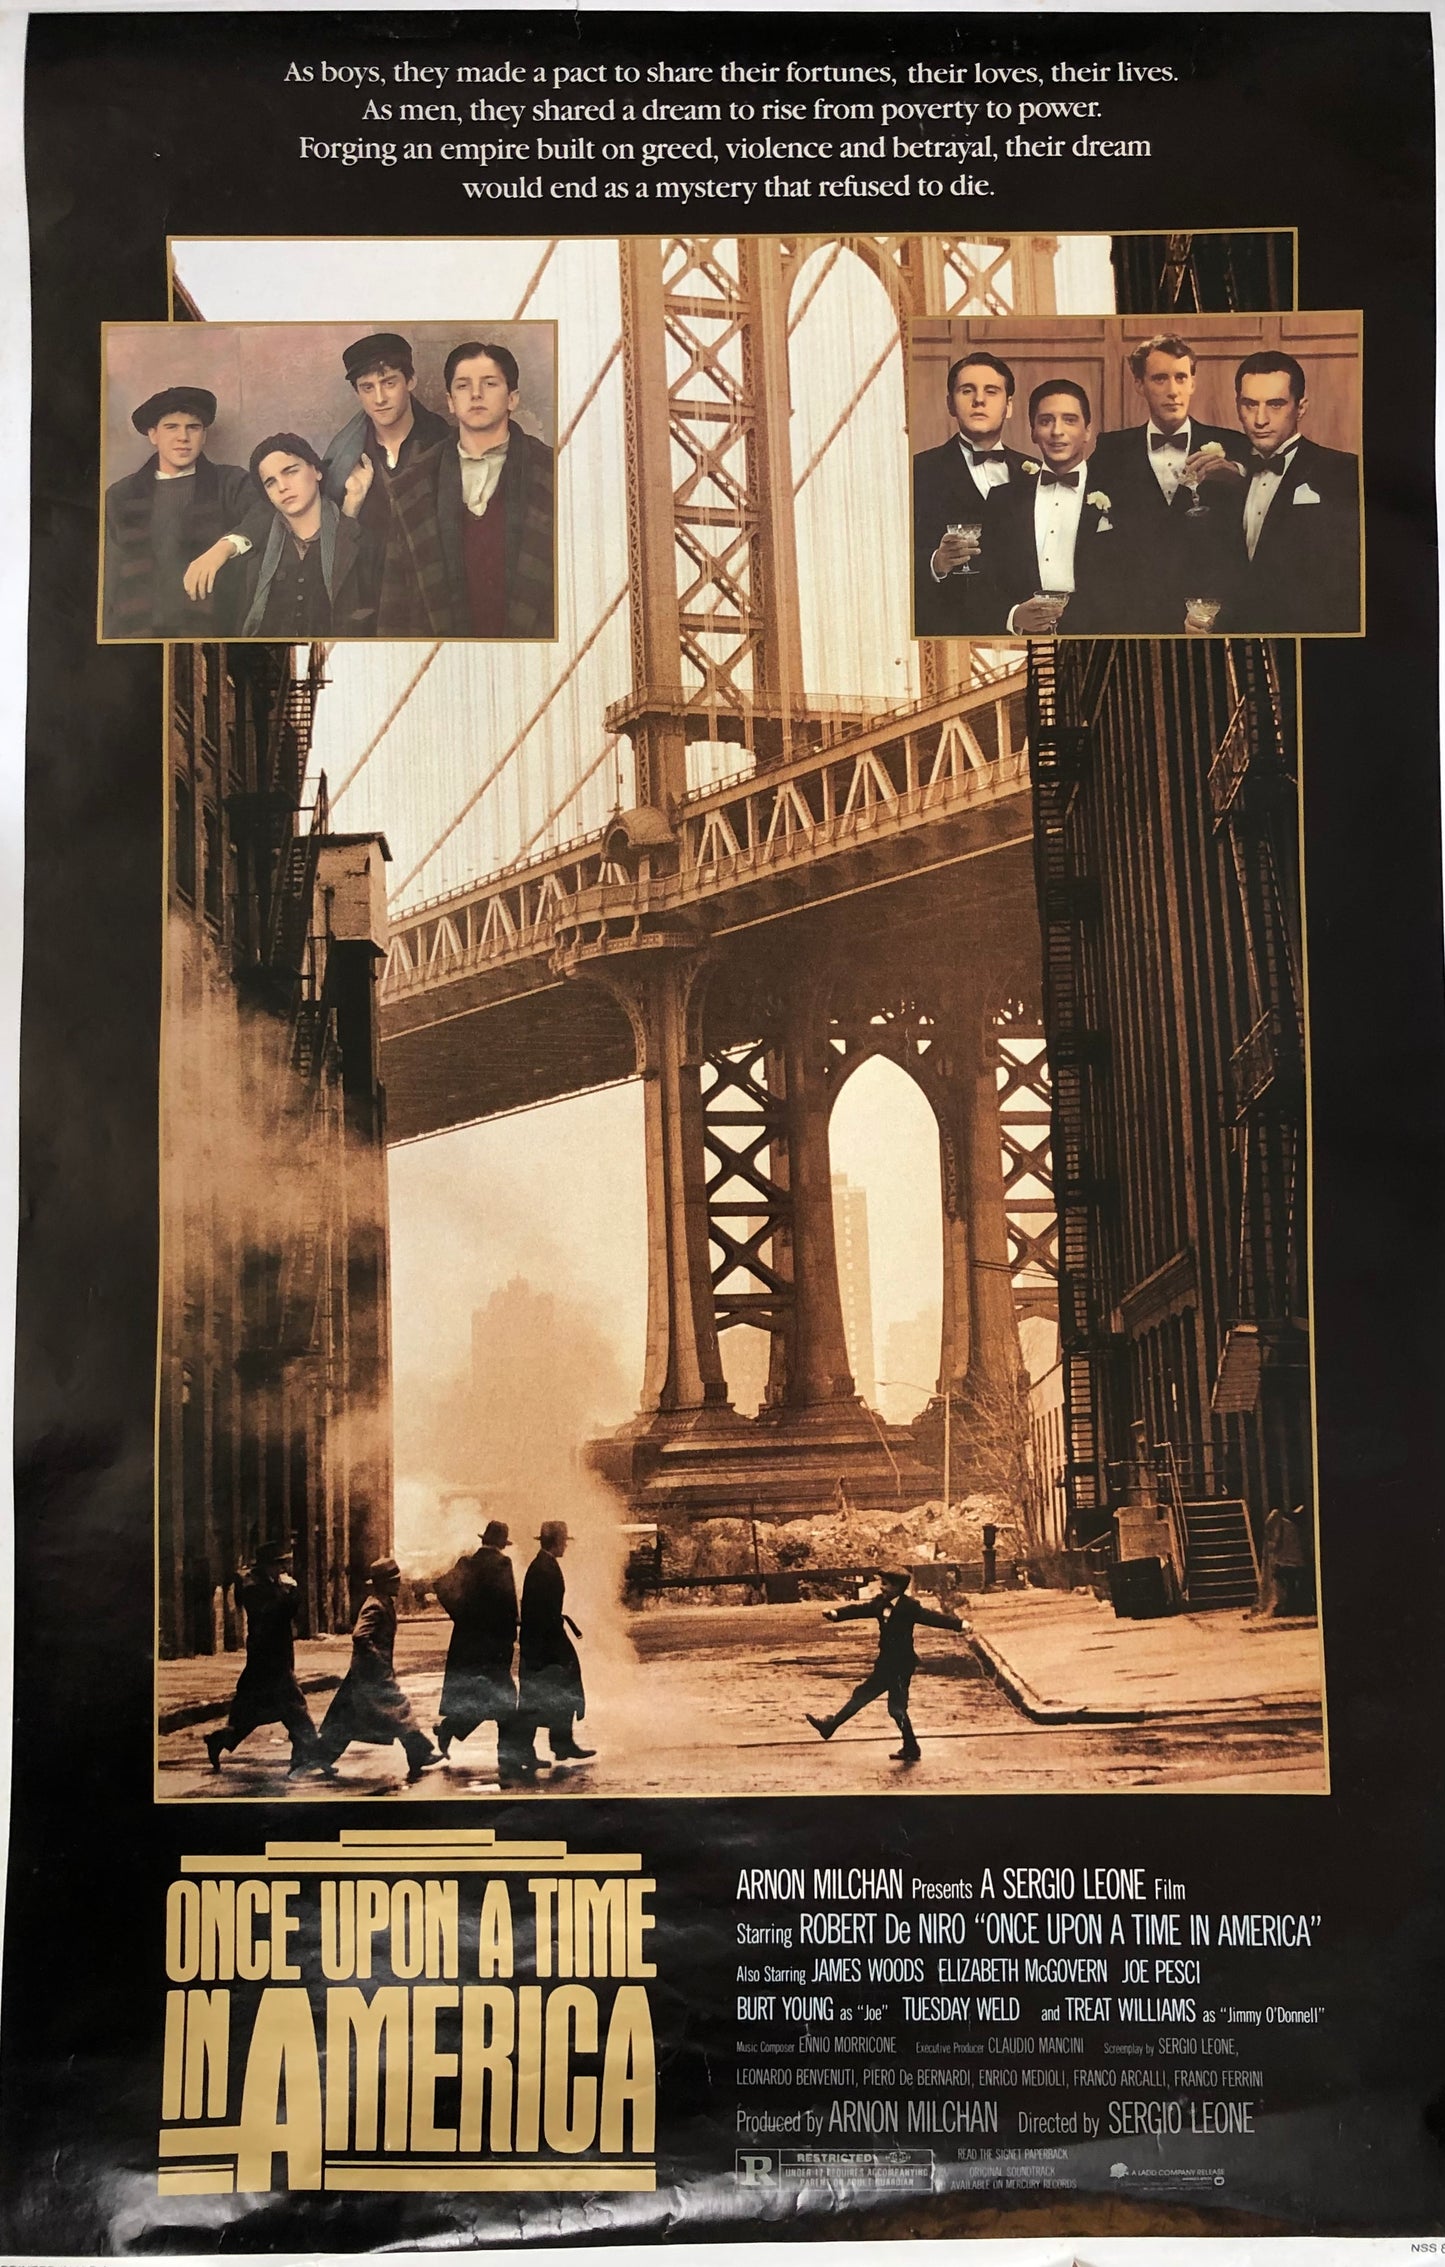 Once Upon a Time in America movie poster